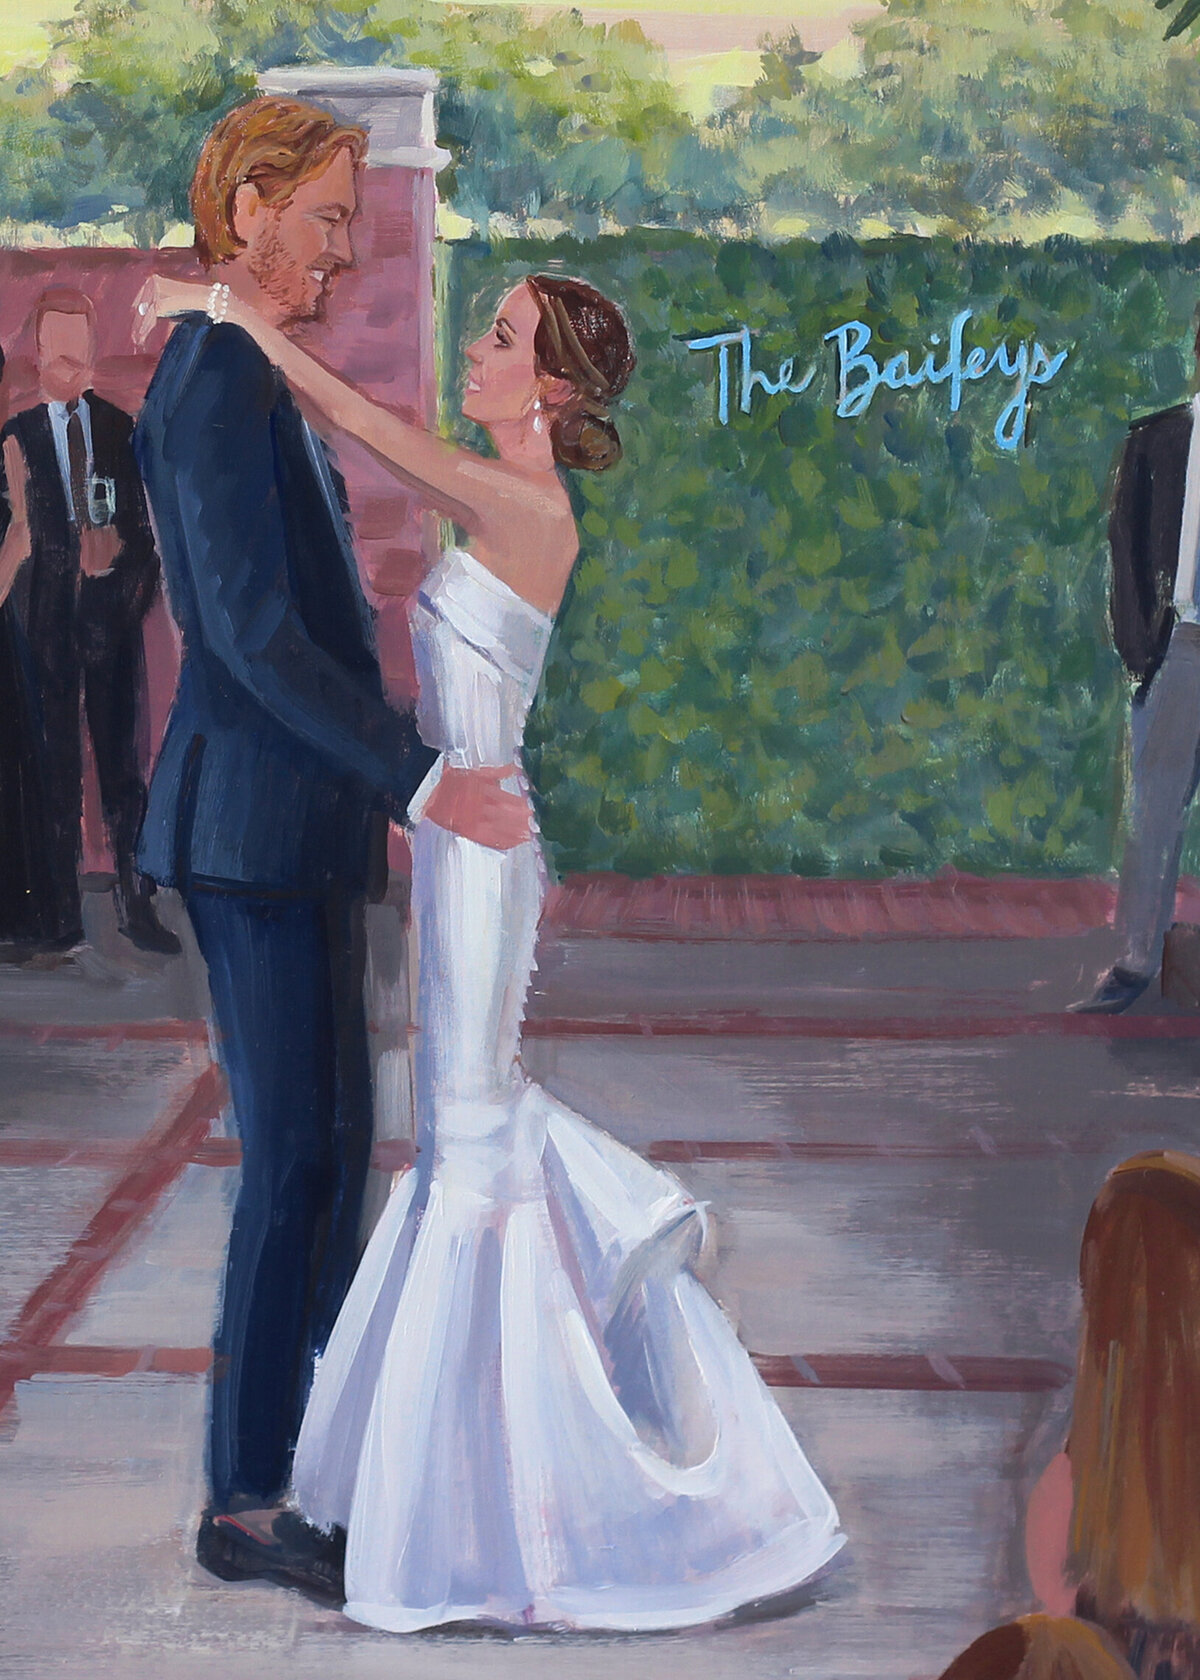 Ben Keys, a Charleston Live Wedding Painter, captures first dance at The Gadsden House.  The couple are surrounded by their wedding guests with the beautiful Charleston venue in the backdrop of the painting.